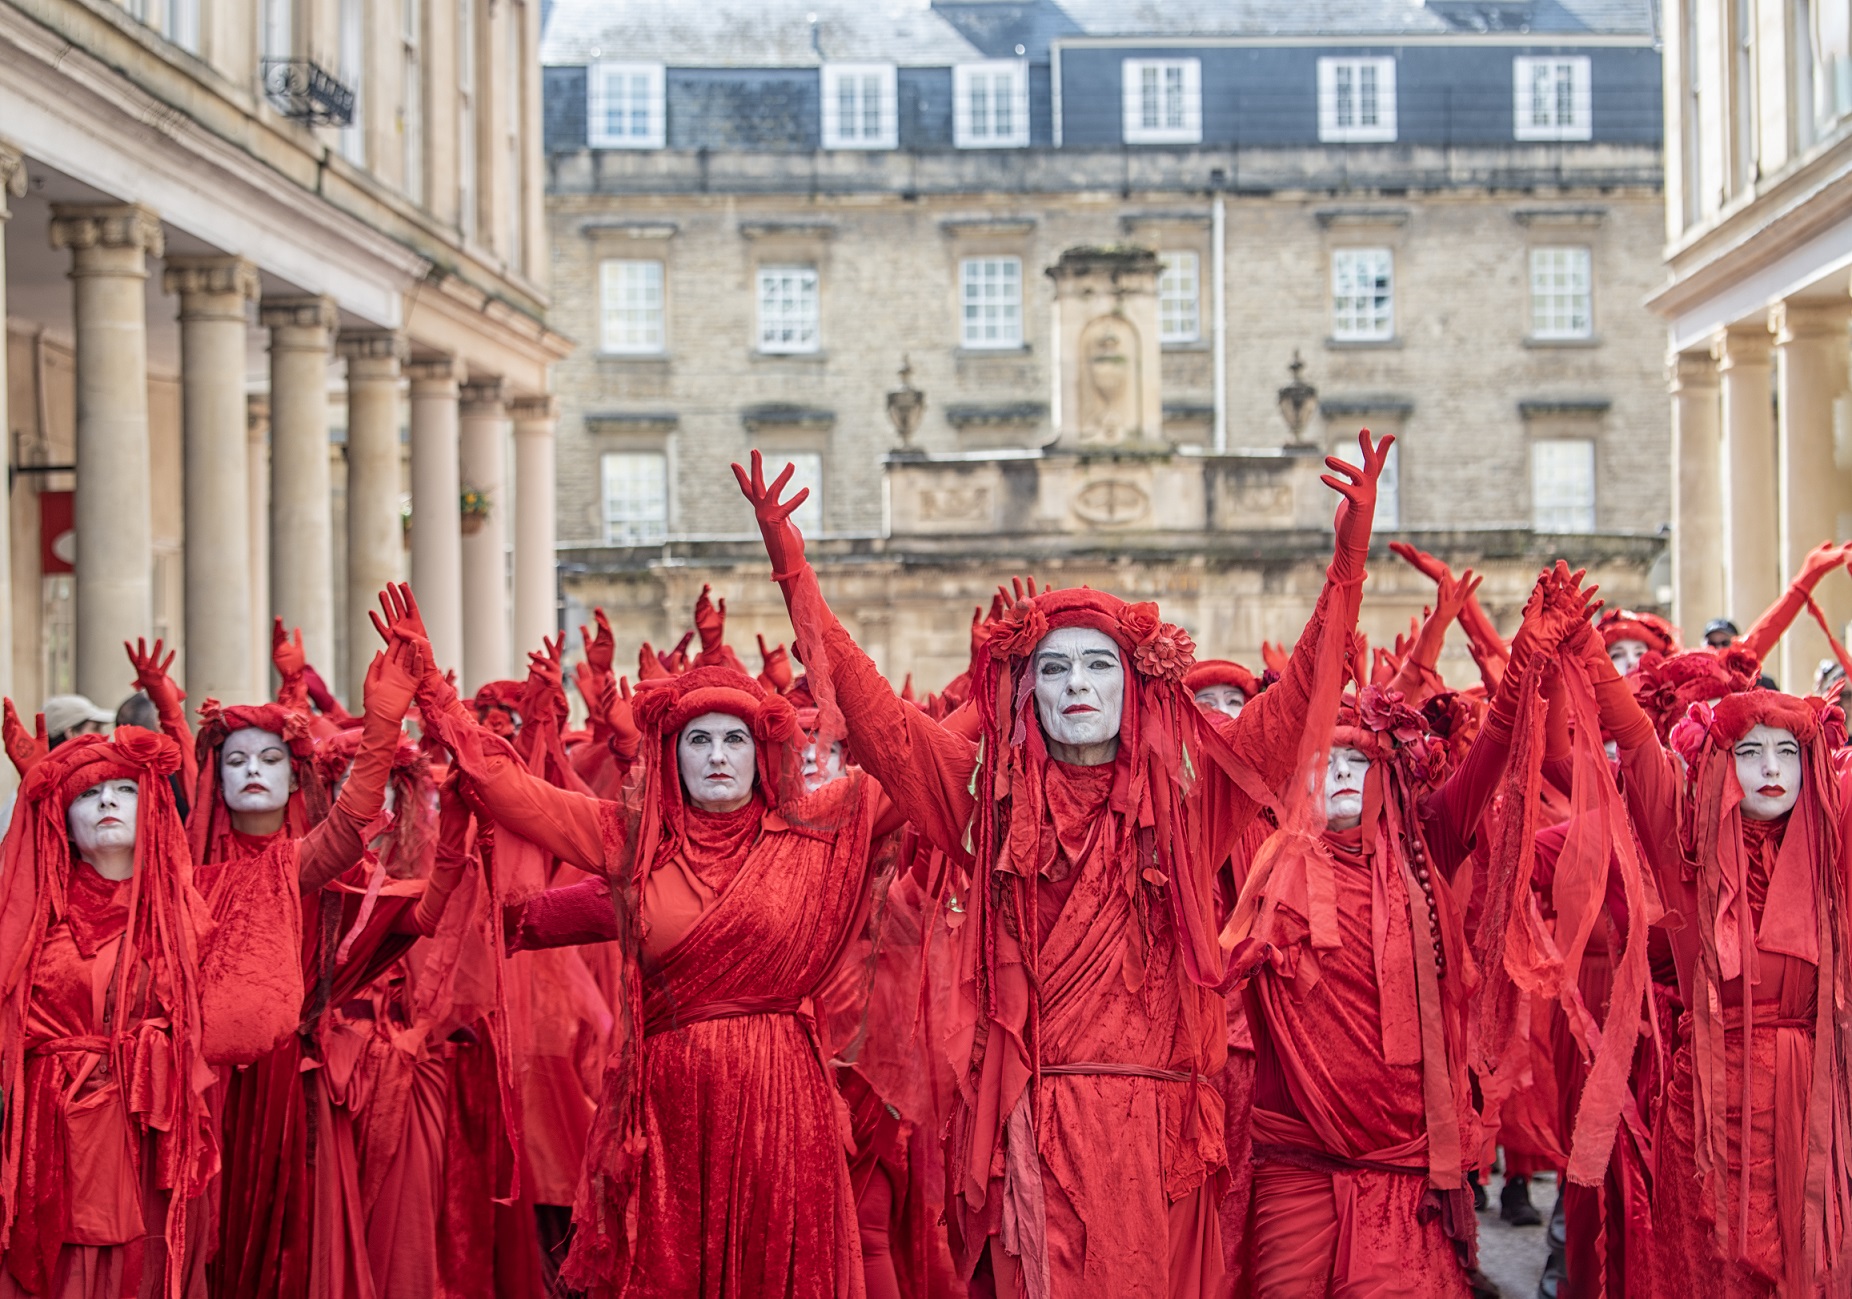 A crowd of people dressed in red robes with faces painted white taking part in 'A Funeral for Nature' theatrical event